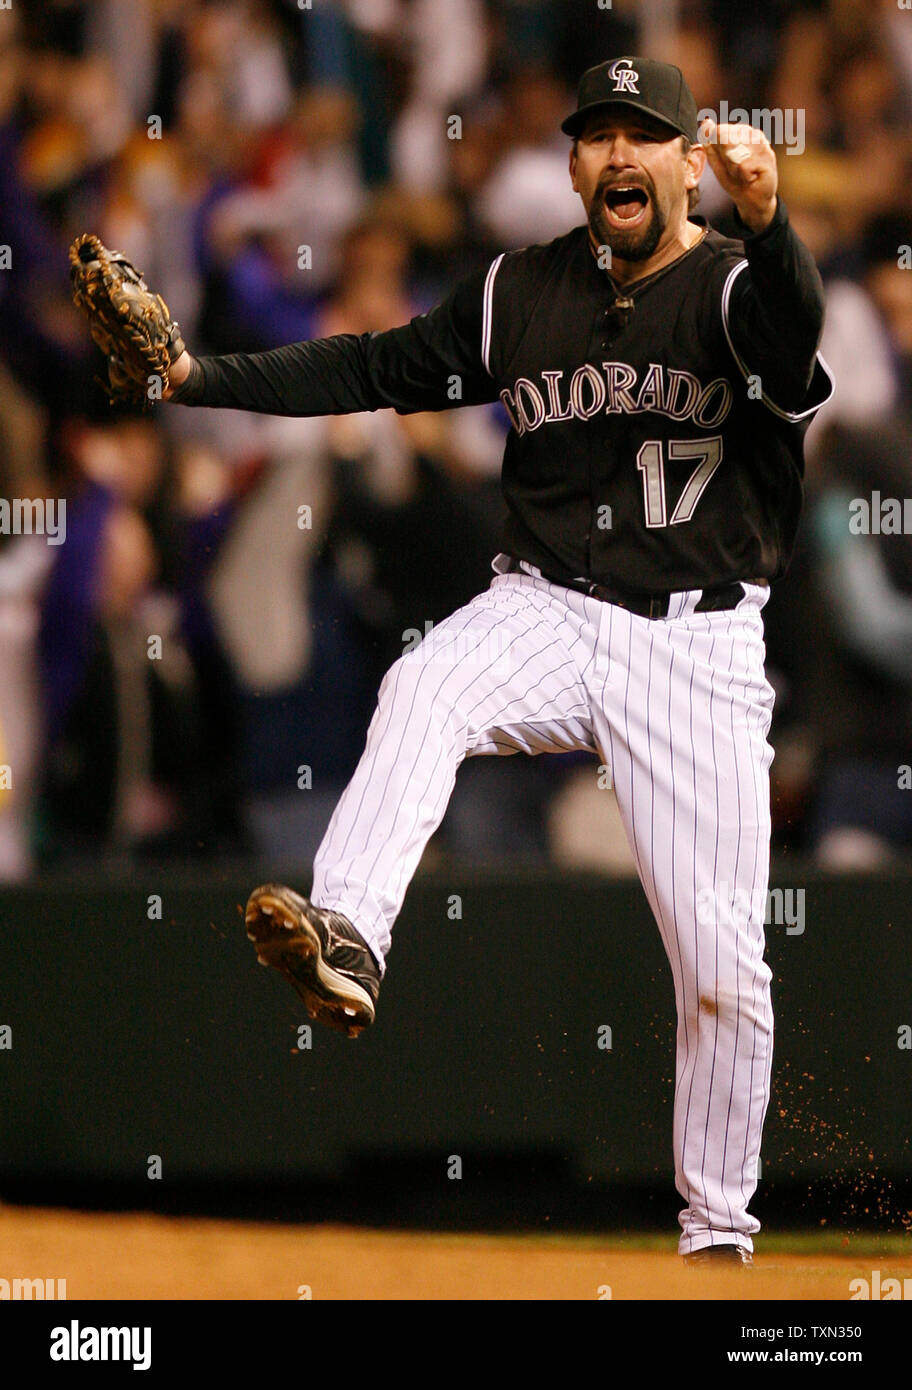 Colorado Rockies first baseman Todd Helton celebrates winning game four of  the National League Championship Series at Coors Field in Denver on October  15, 2007. Colorado won the National League championship defeating